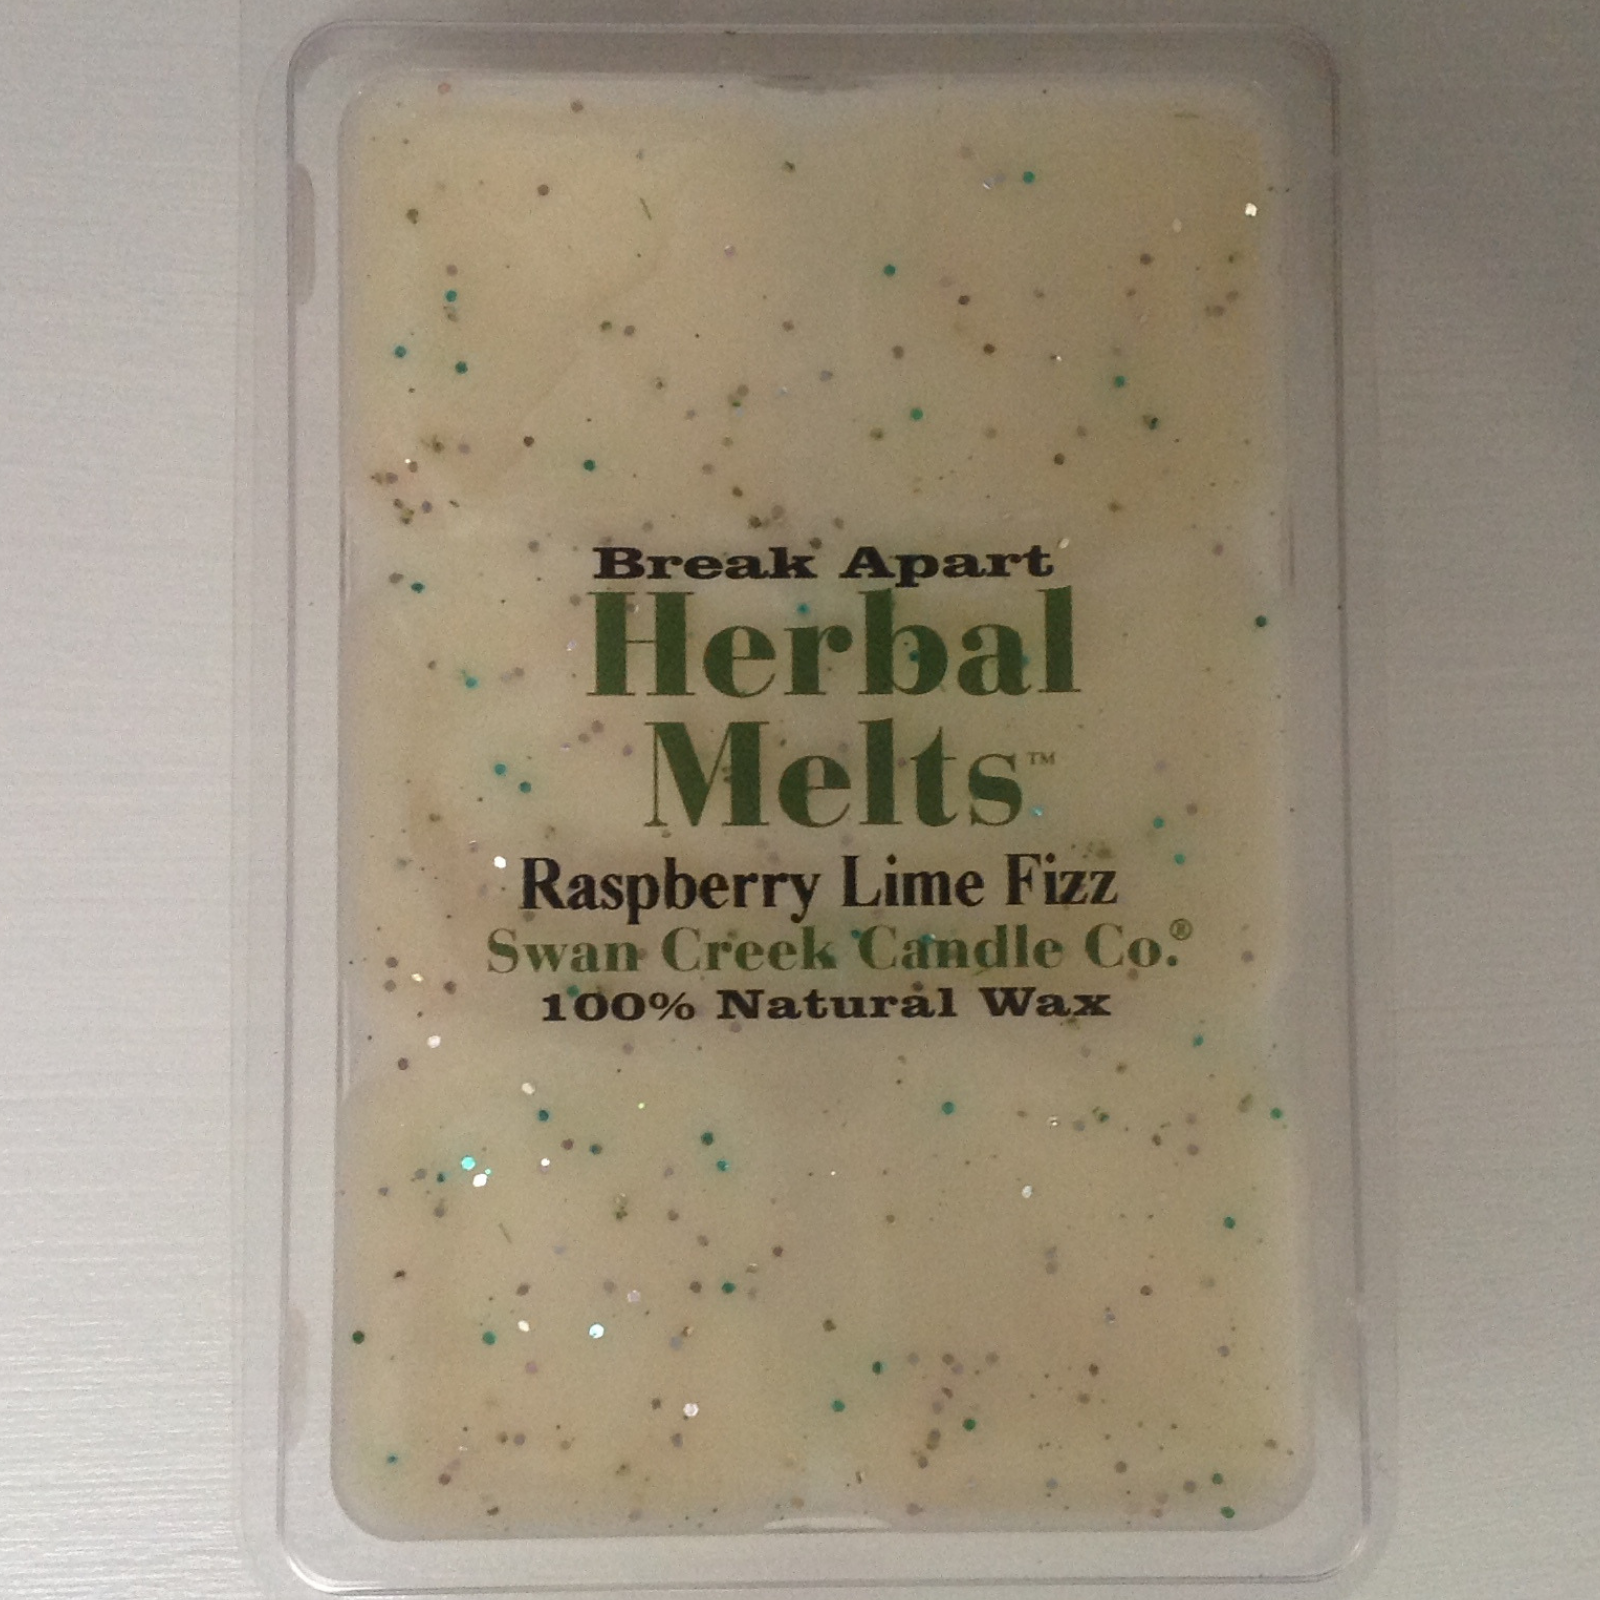 Swan Creek Candle Company Herbal Drizzle Wax Melts Raspberry Lime Fizz